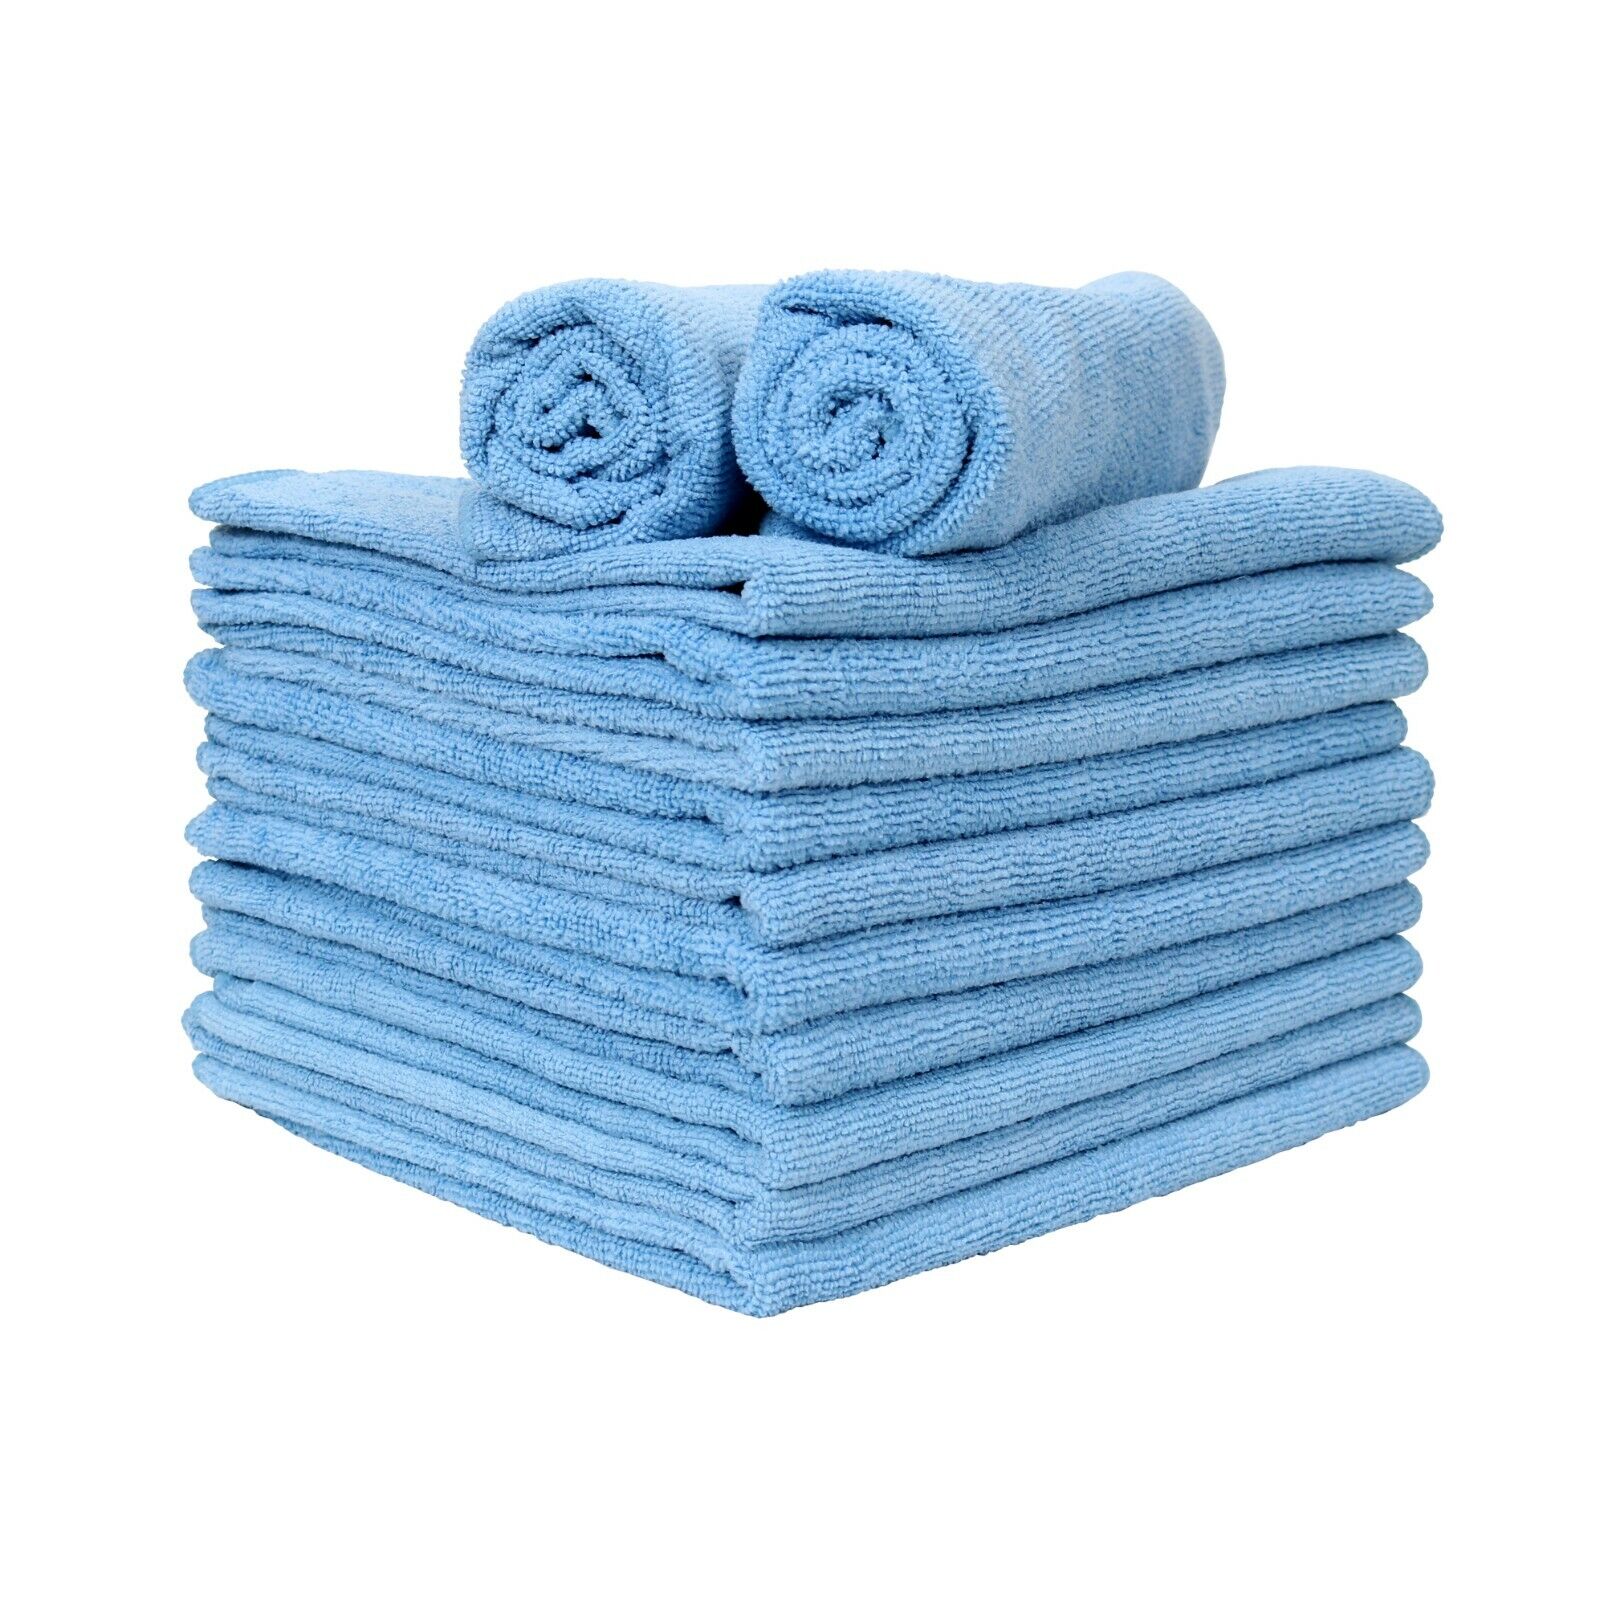 Microfiber Hand Towels 12 Packs - 16 x 27 Soft Reusable Absorbent Color Options Arkwright Does Not Apply